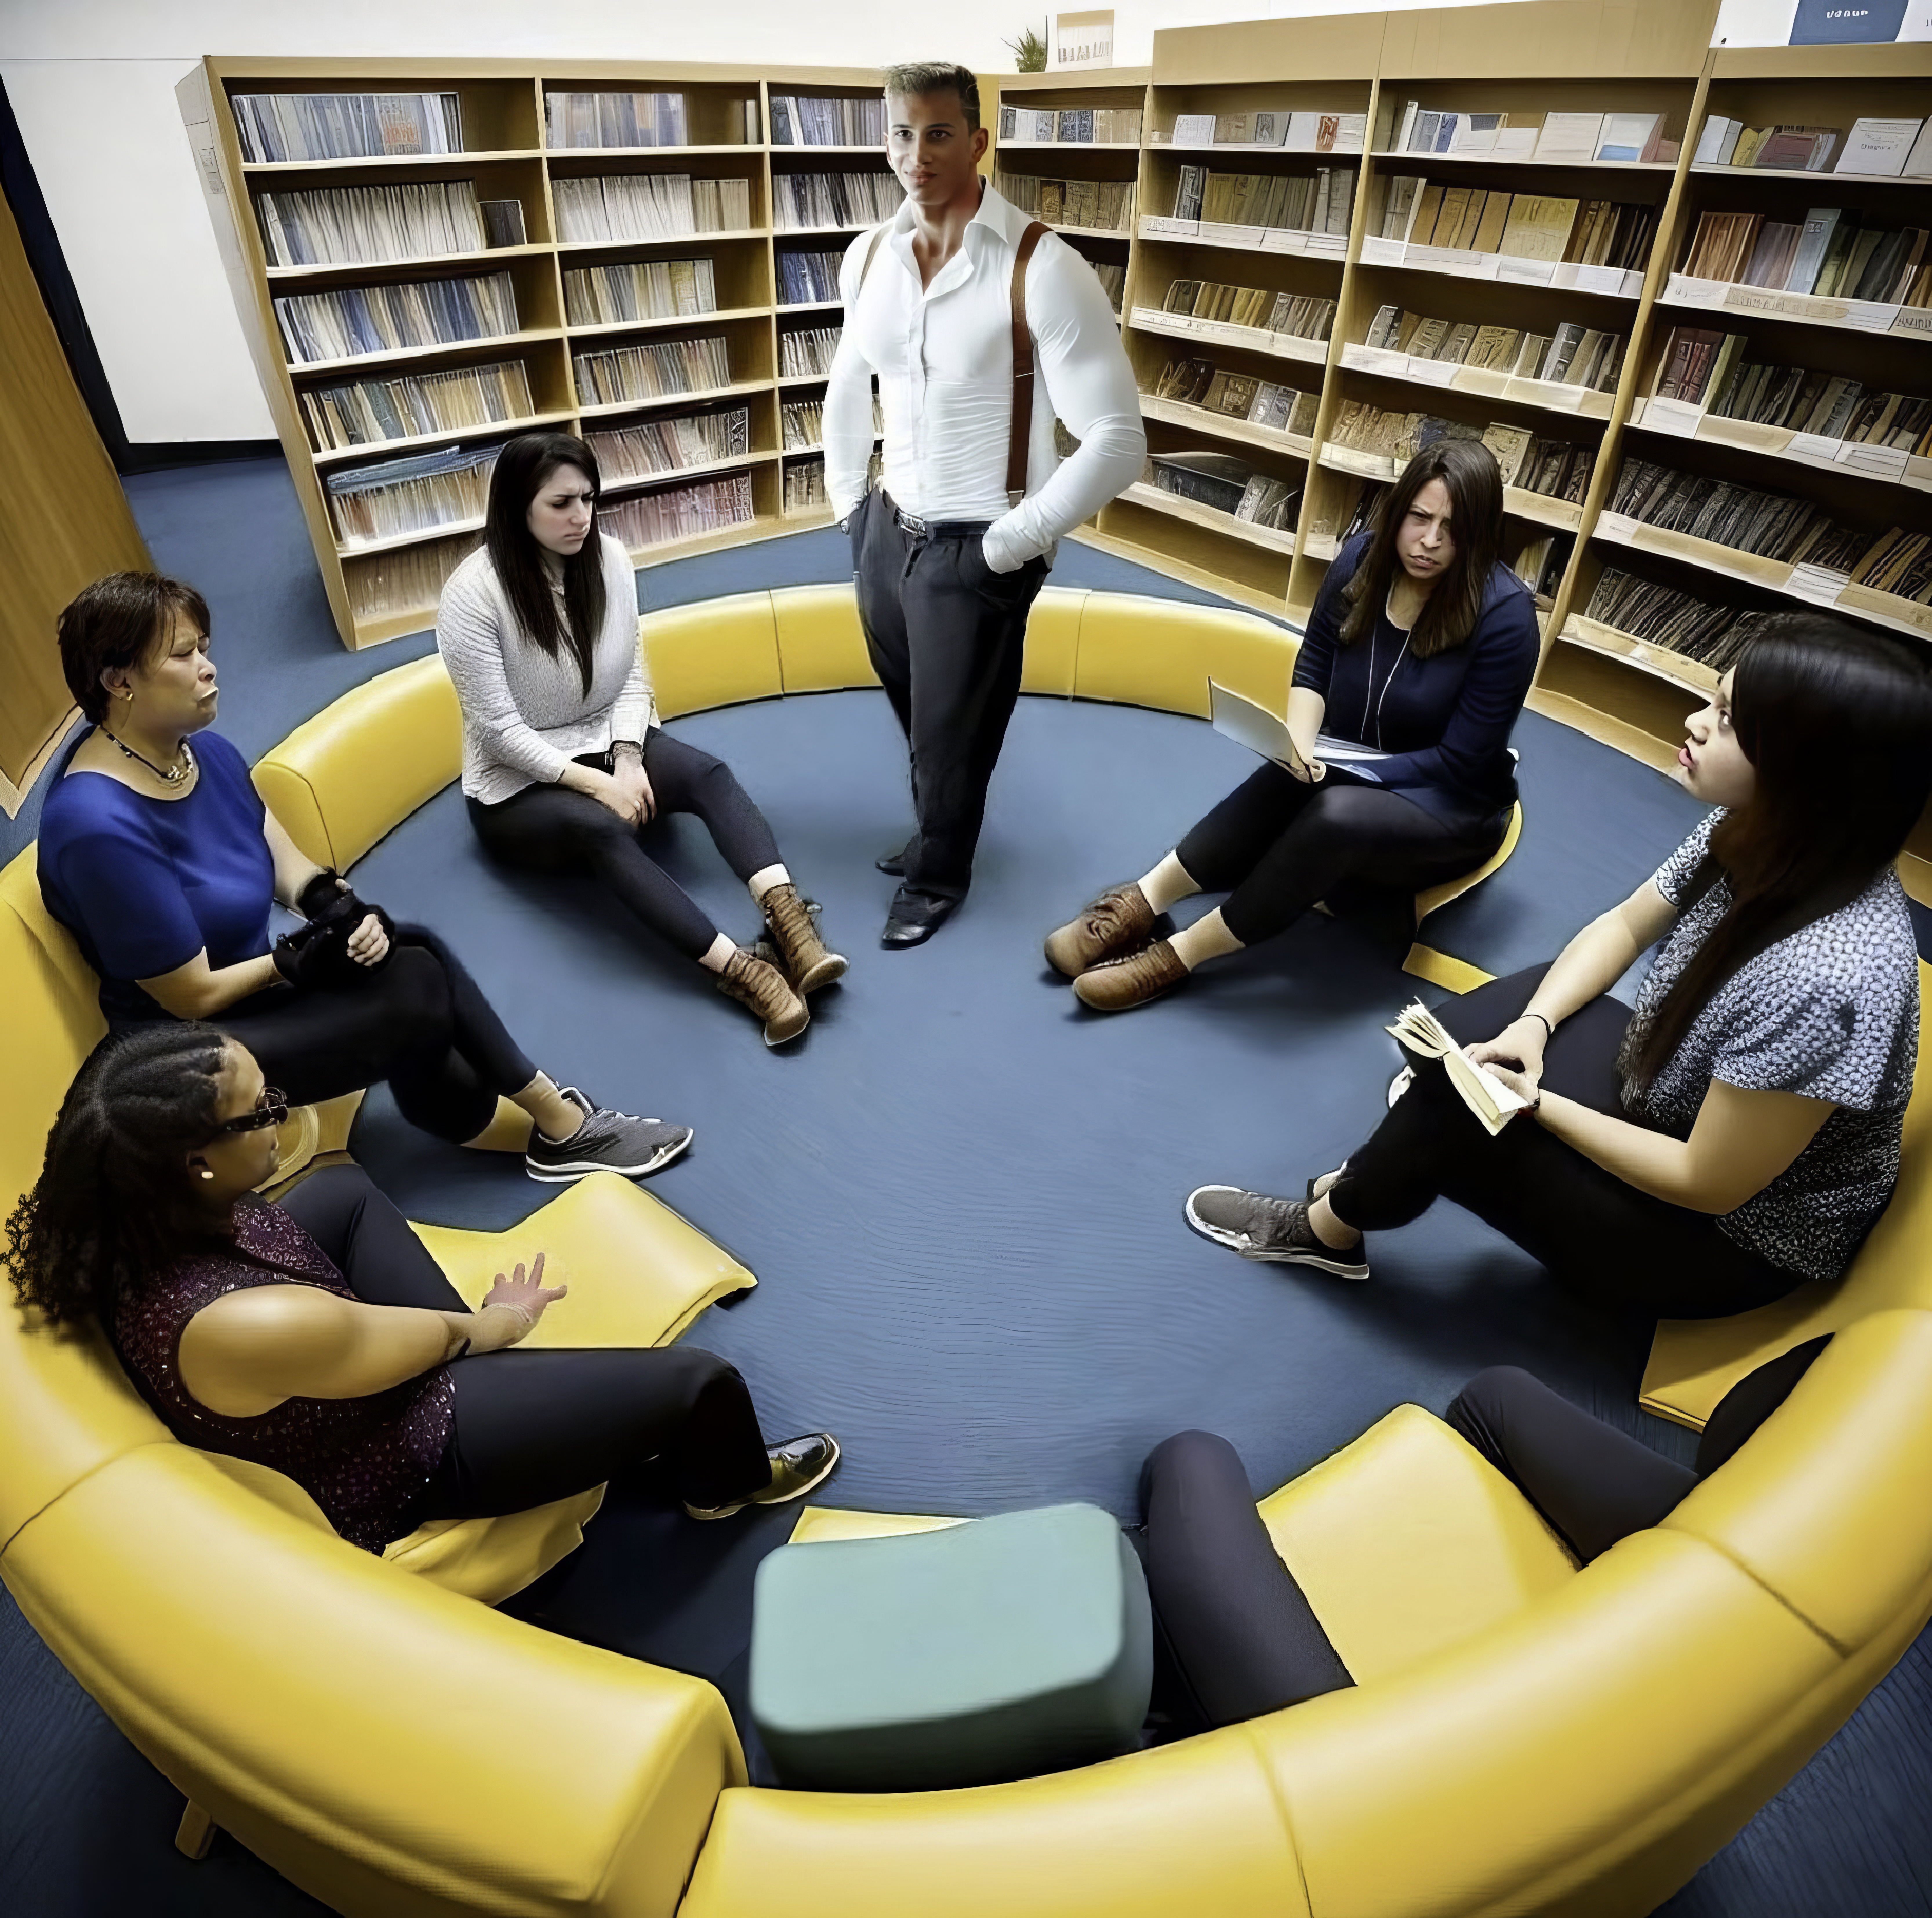 Women sitting in a semi-circle in a library for a book club. A young man hovers over them.